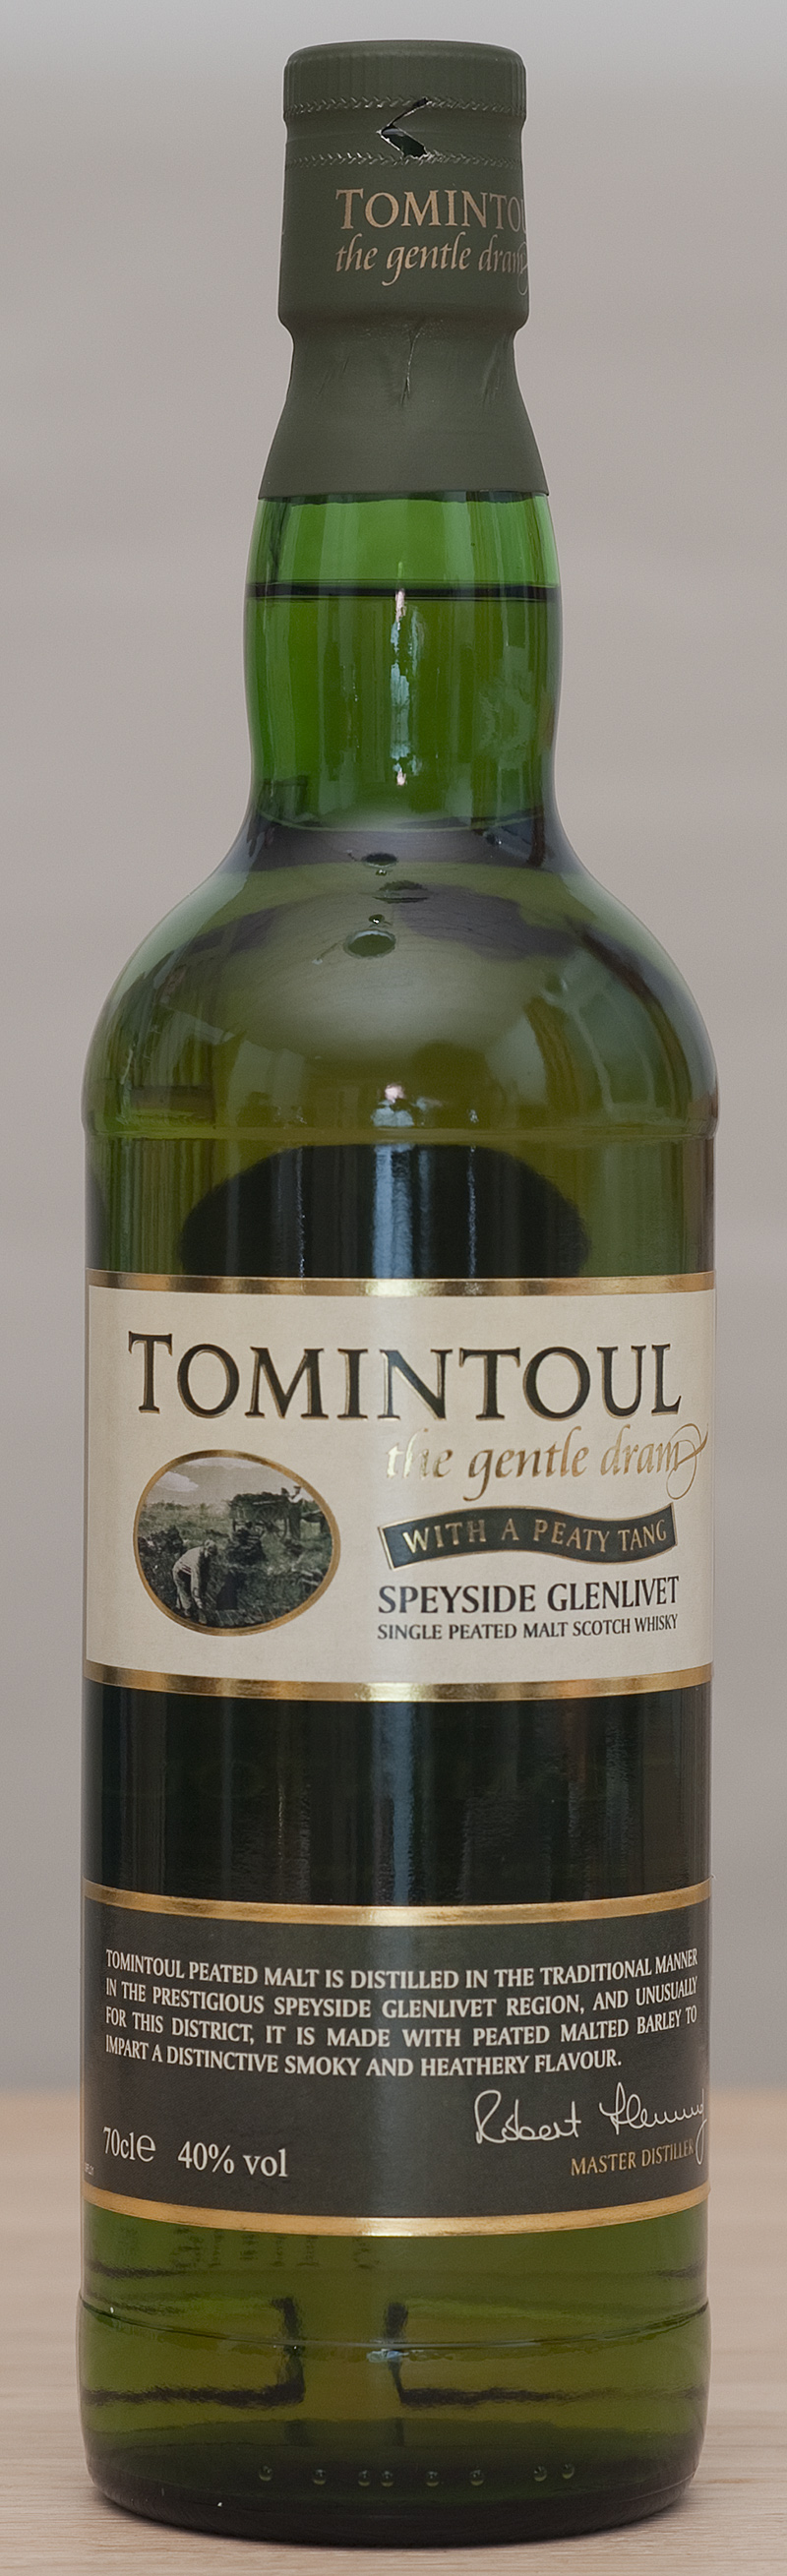 Billede: tomintoul with a peaty tang - bottle front.jpg